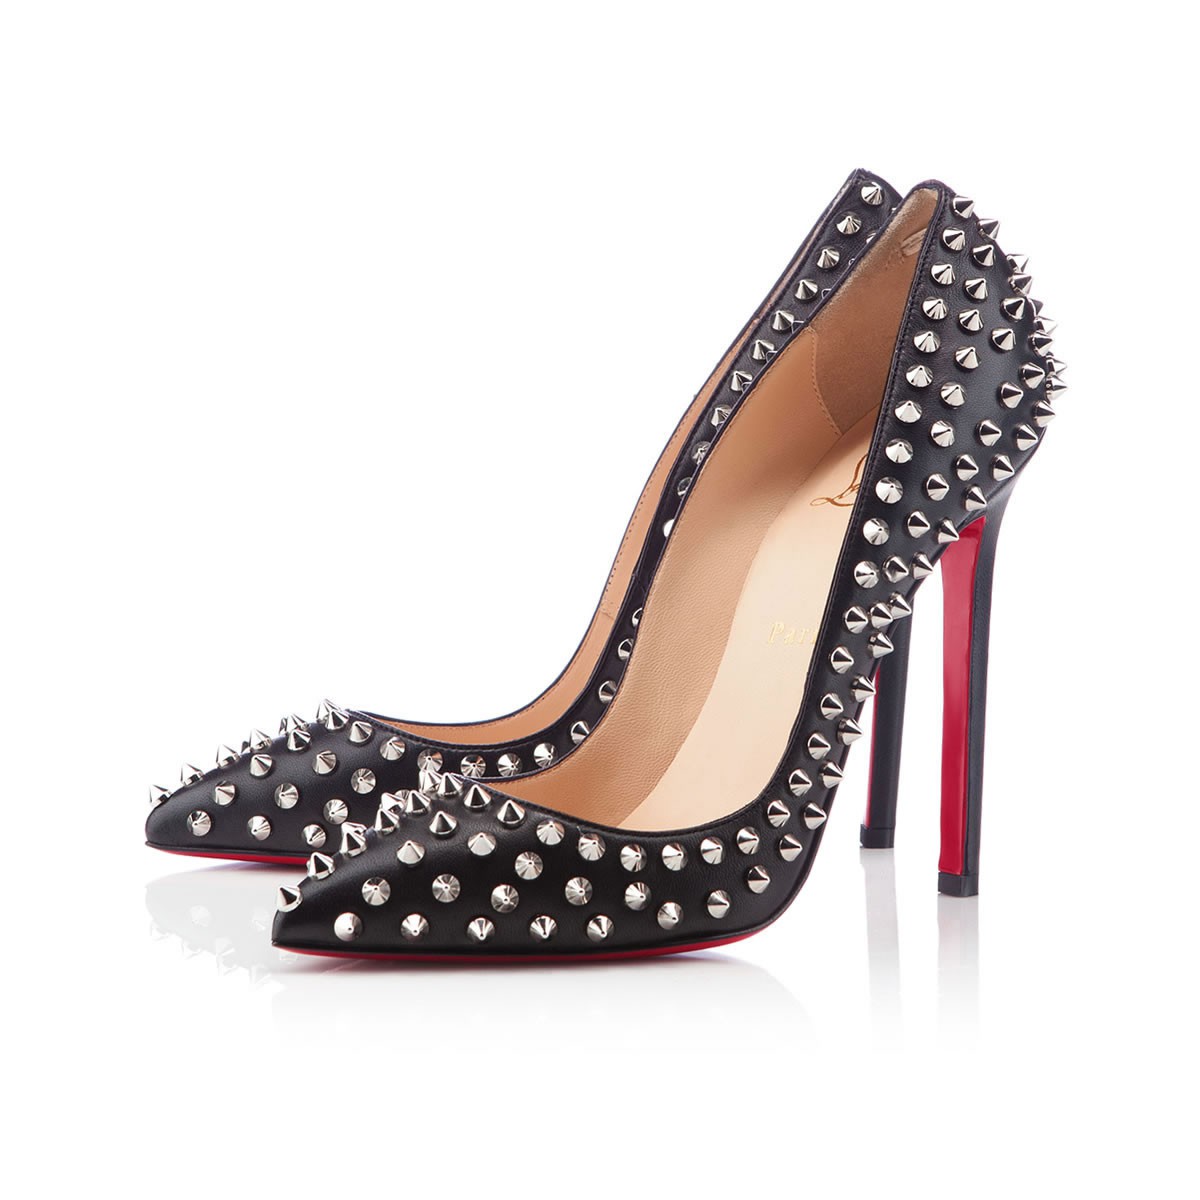 Christian Louboutin Pigalle Spikes 120mm Pumps Black